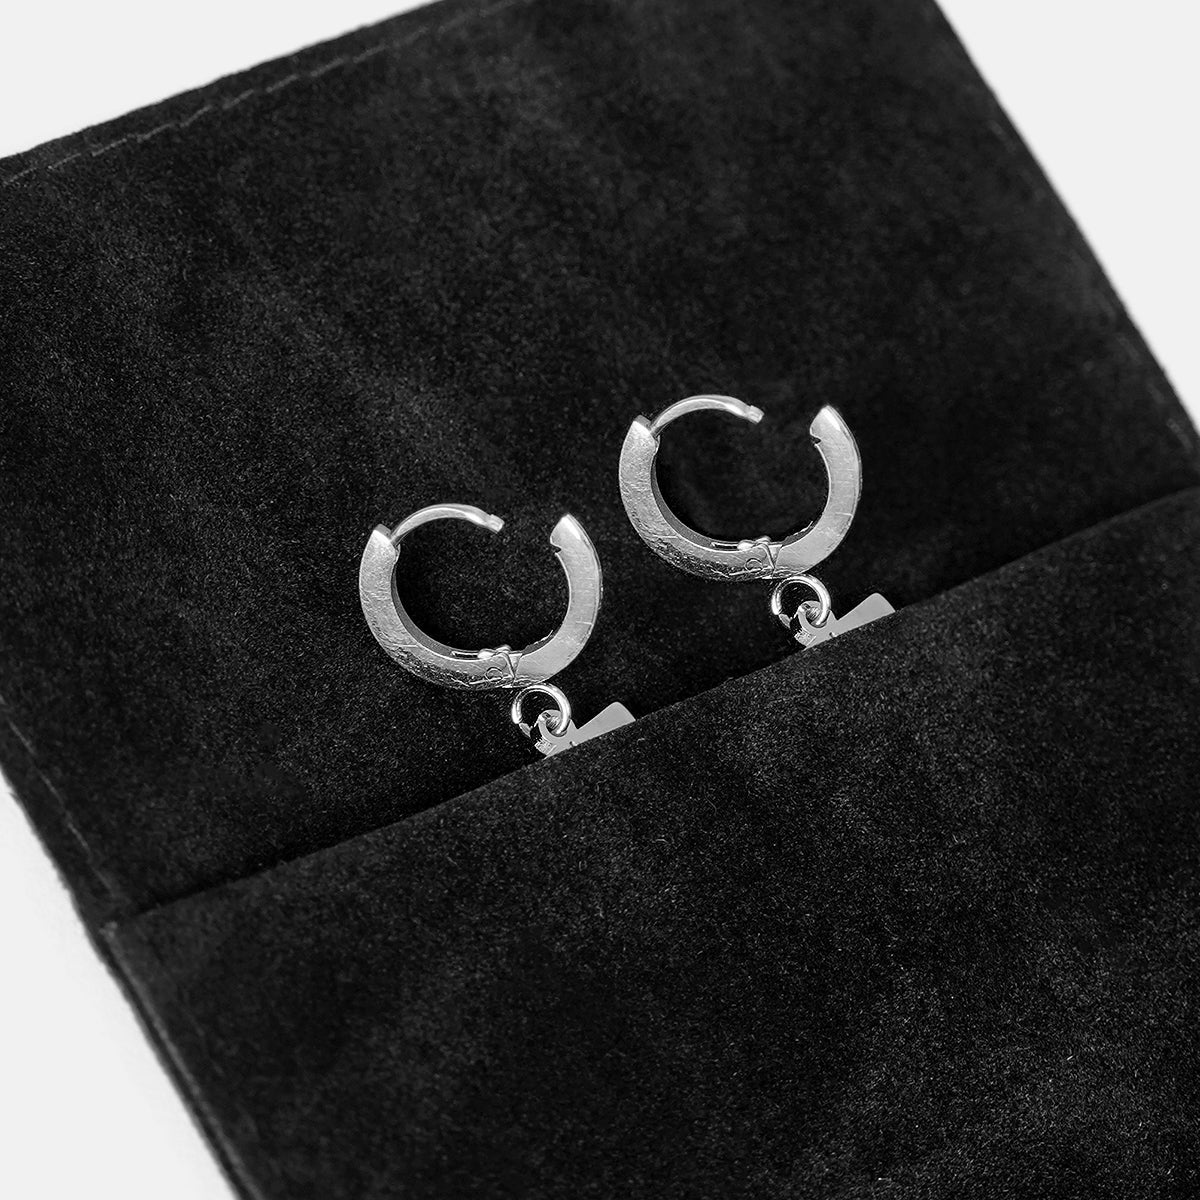 71 Number Earring - Stainless Steel